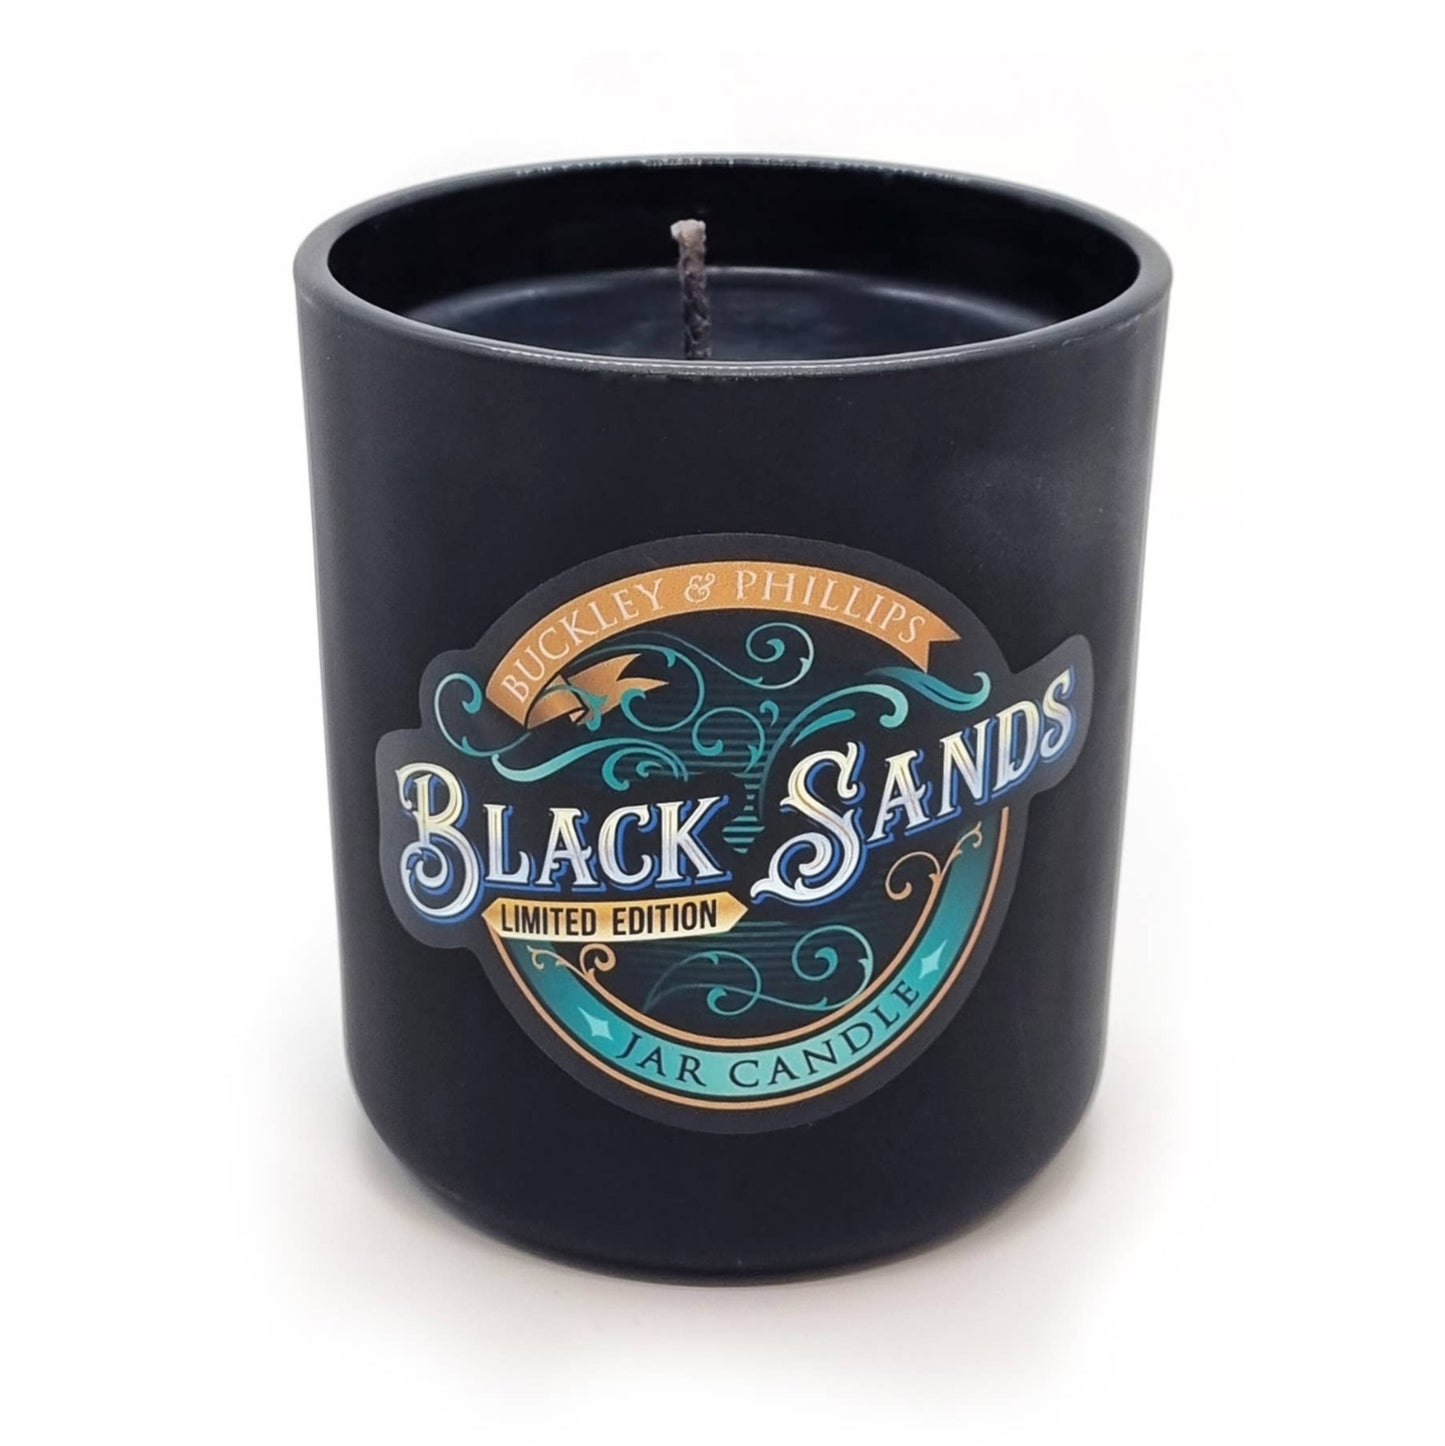 Black Sands Limited Edition Candle